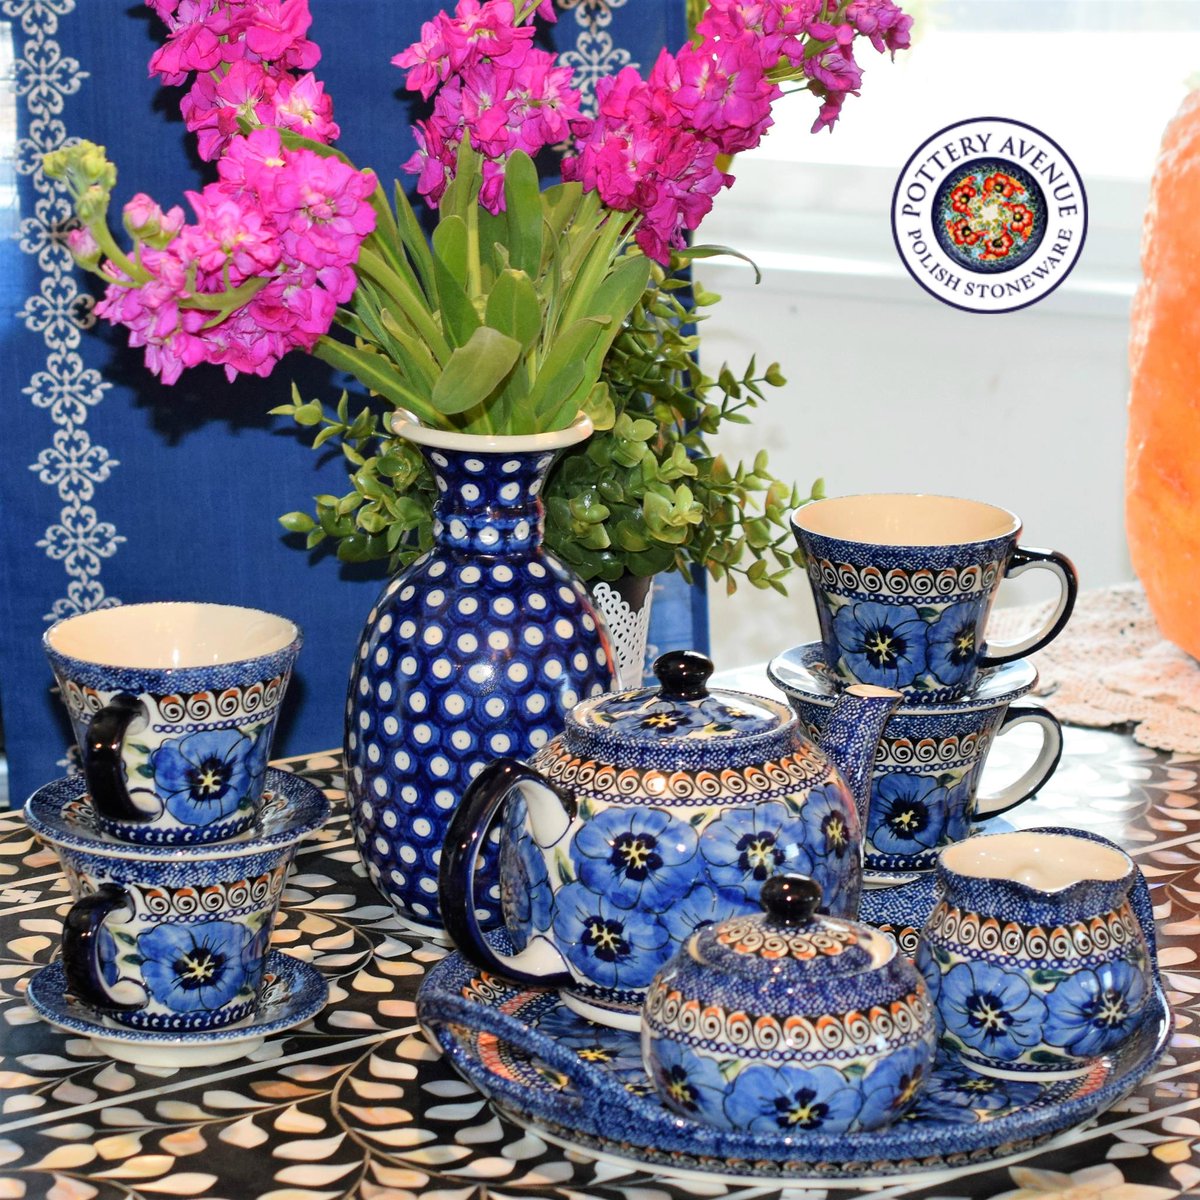 Get beautifully designed tea pots here: bit.ly/2Hi7DAu 

If you want cups & saucers, you can place special orders for them at 3606277489 or e-mail us at support@potteryavenue.com

#polishpottery #teasets #teapots #cups #saucers #teacups #cupsandsaucers #teacupsandsaucers